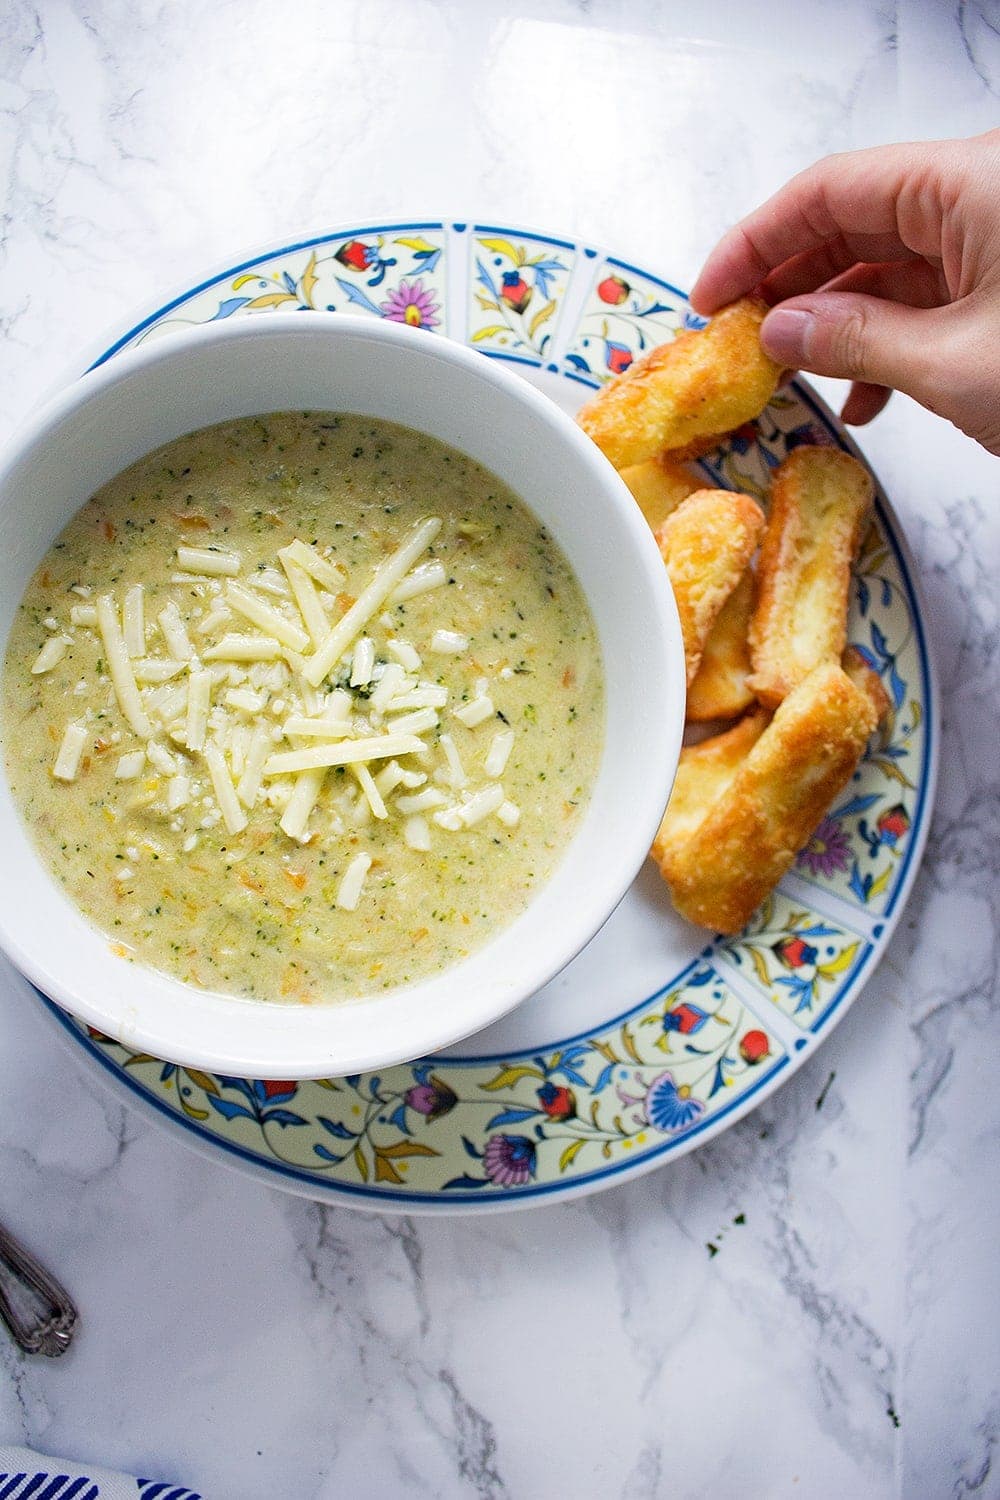 Can you ever have too much cheese? These crispy halloumi fries are the perfect thing to dip into this indulgent broccoli cheese soup.